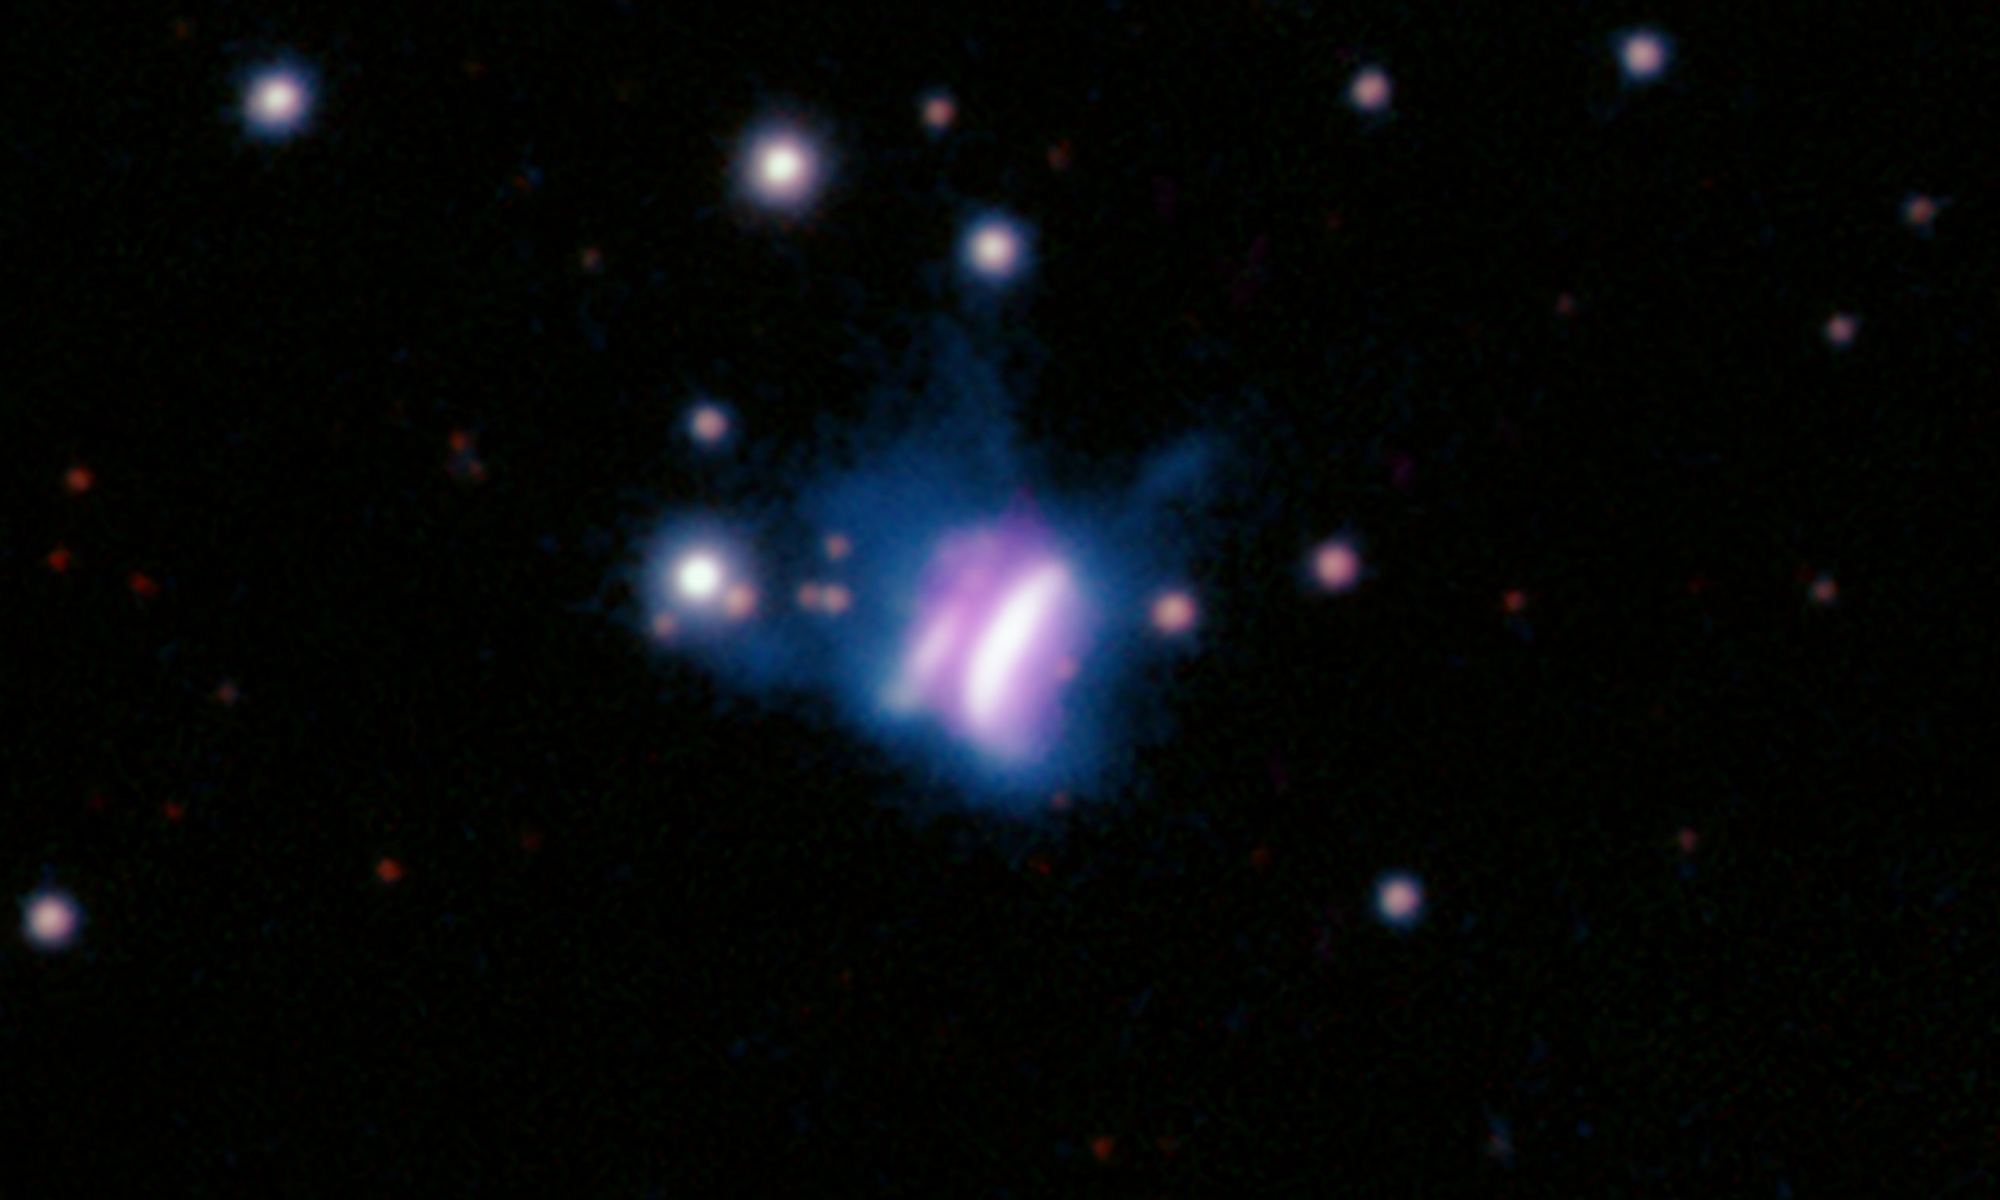 Magenta, butterfly shaped blobs in space